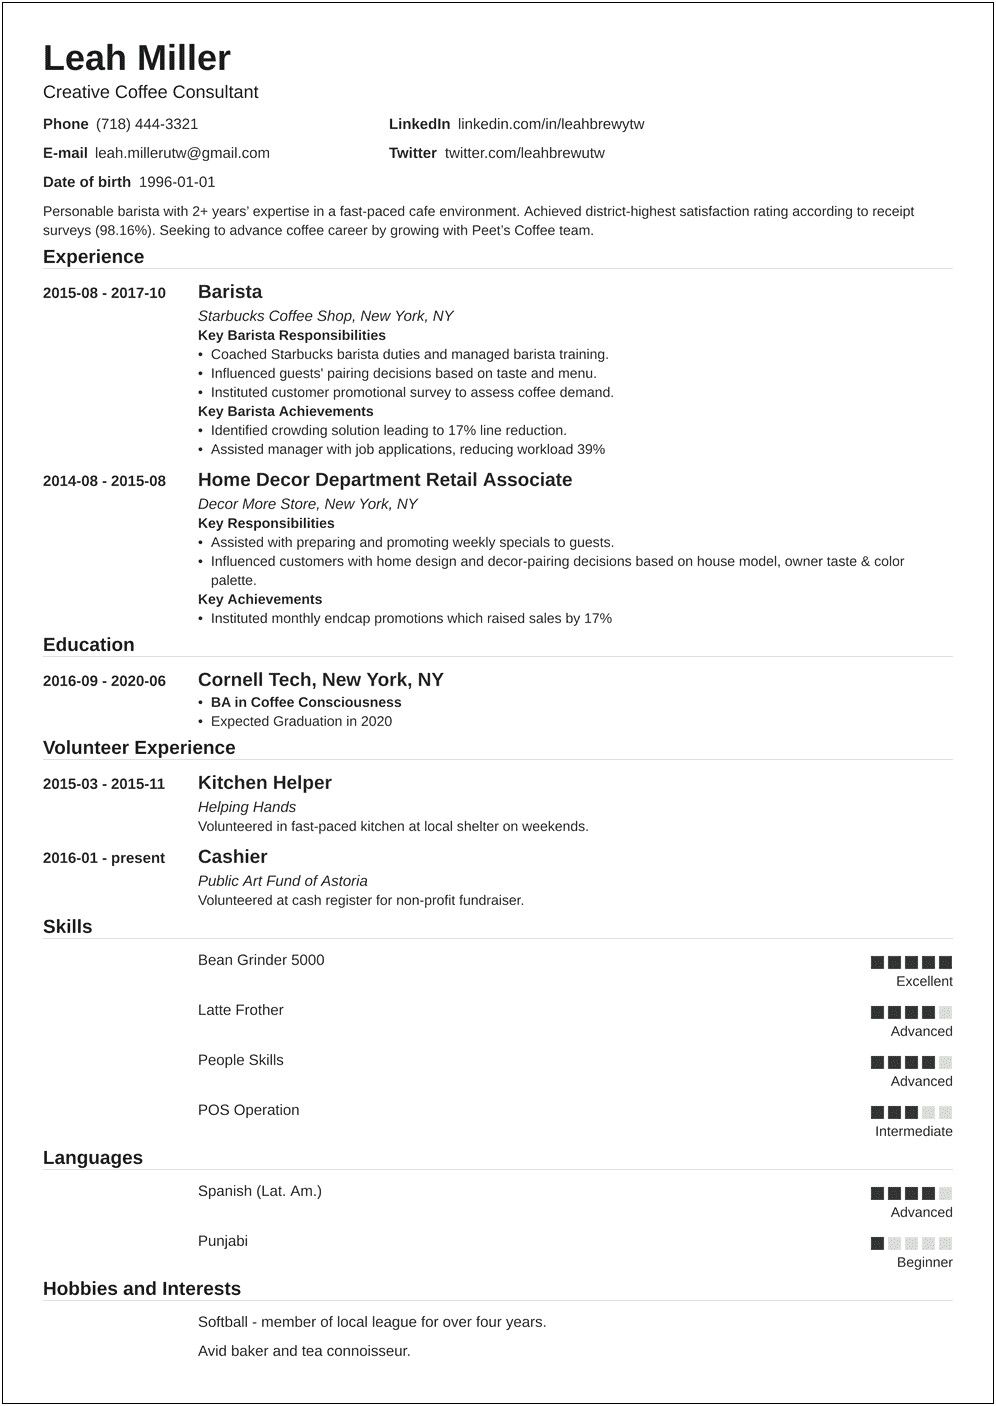 Free Resume Templates Applying As A Barista